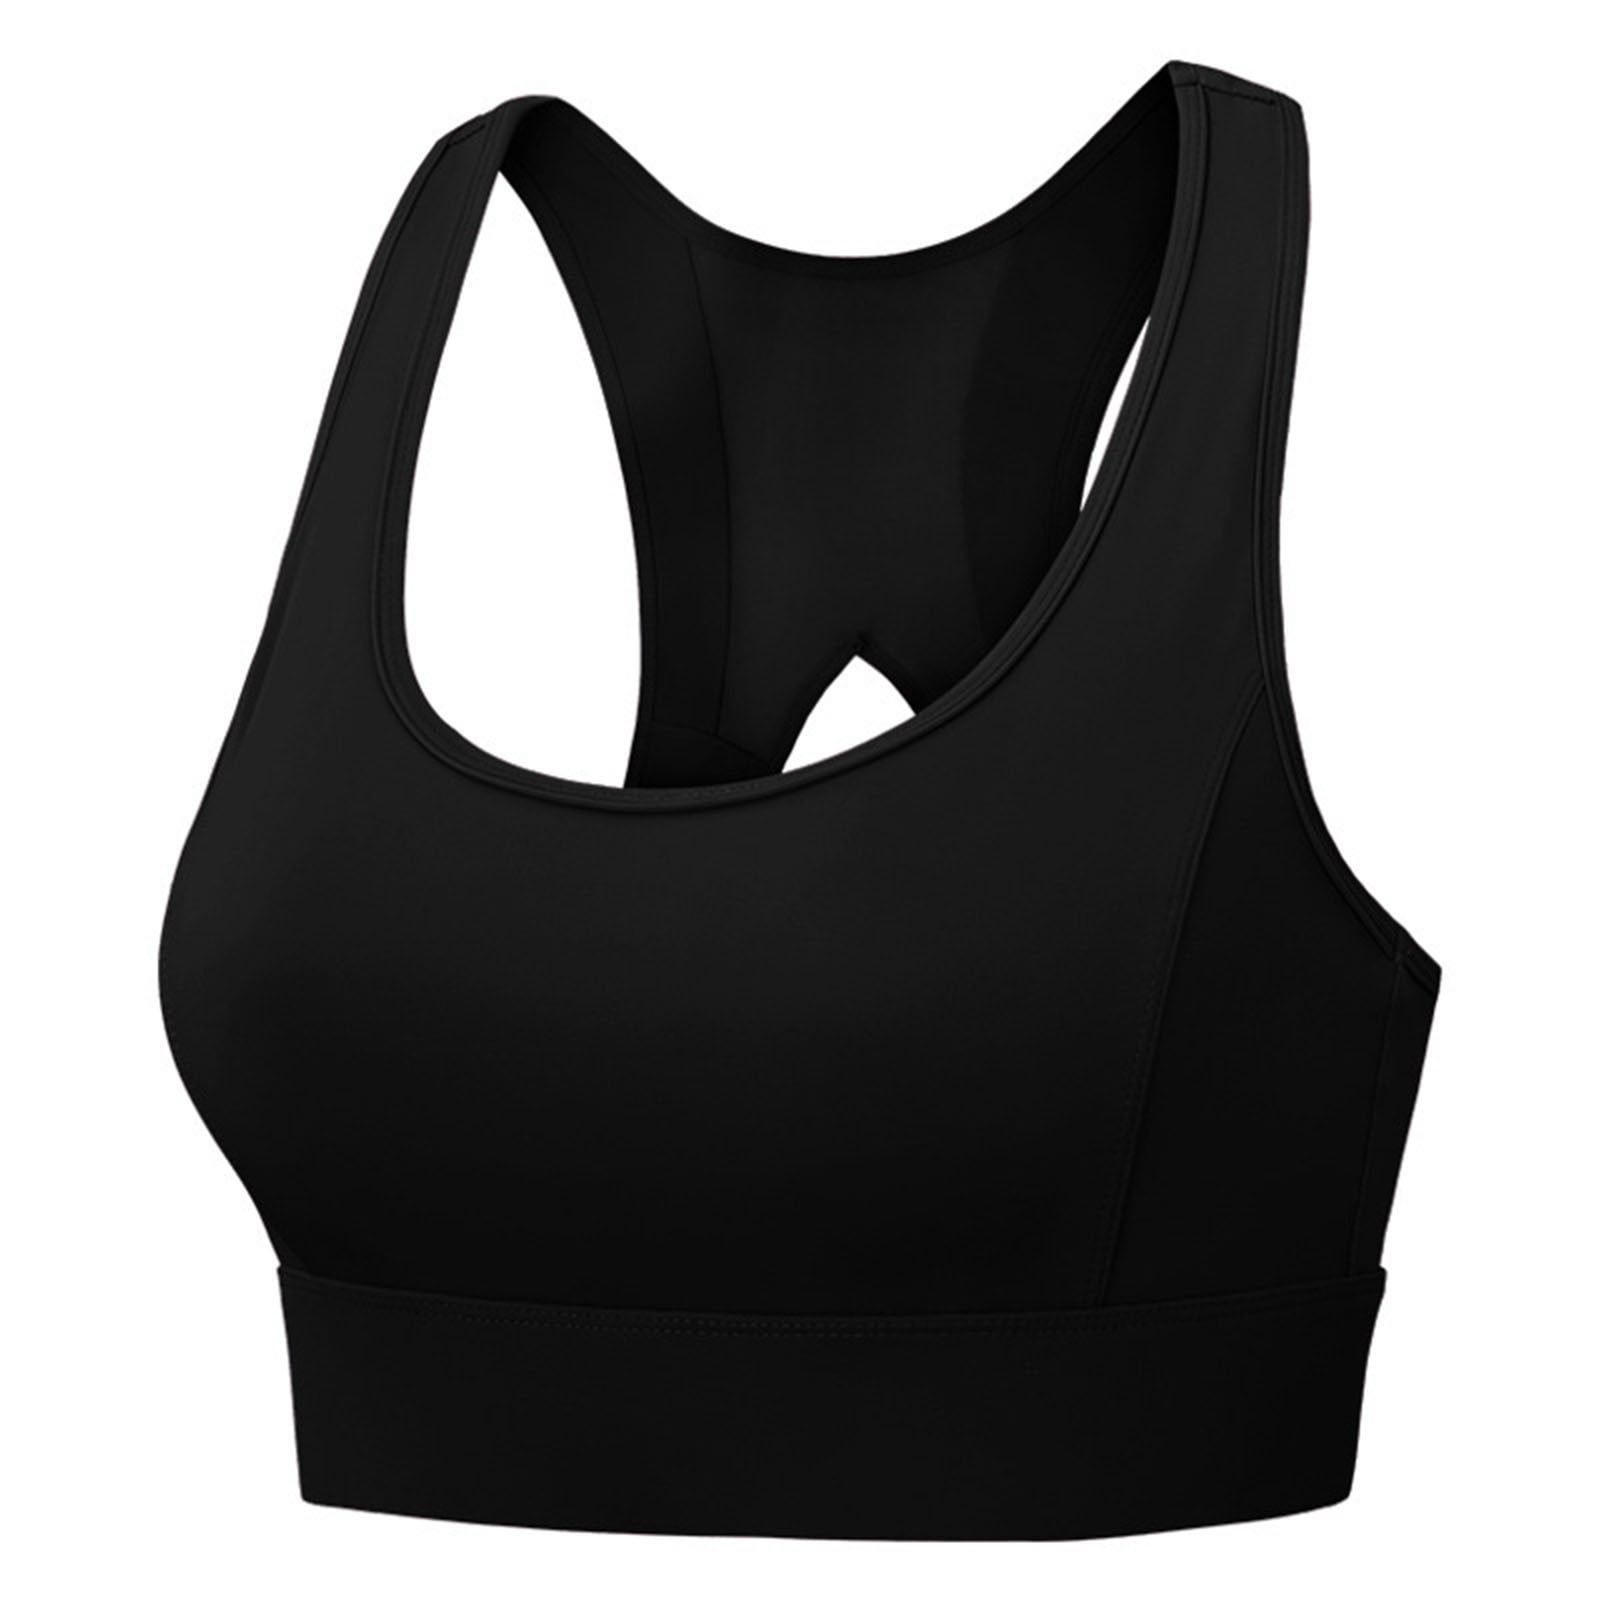 Women's Support Bras With Back Closure High Impact Sports Bras